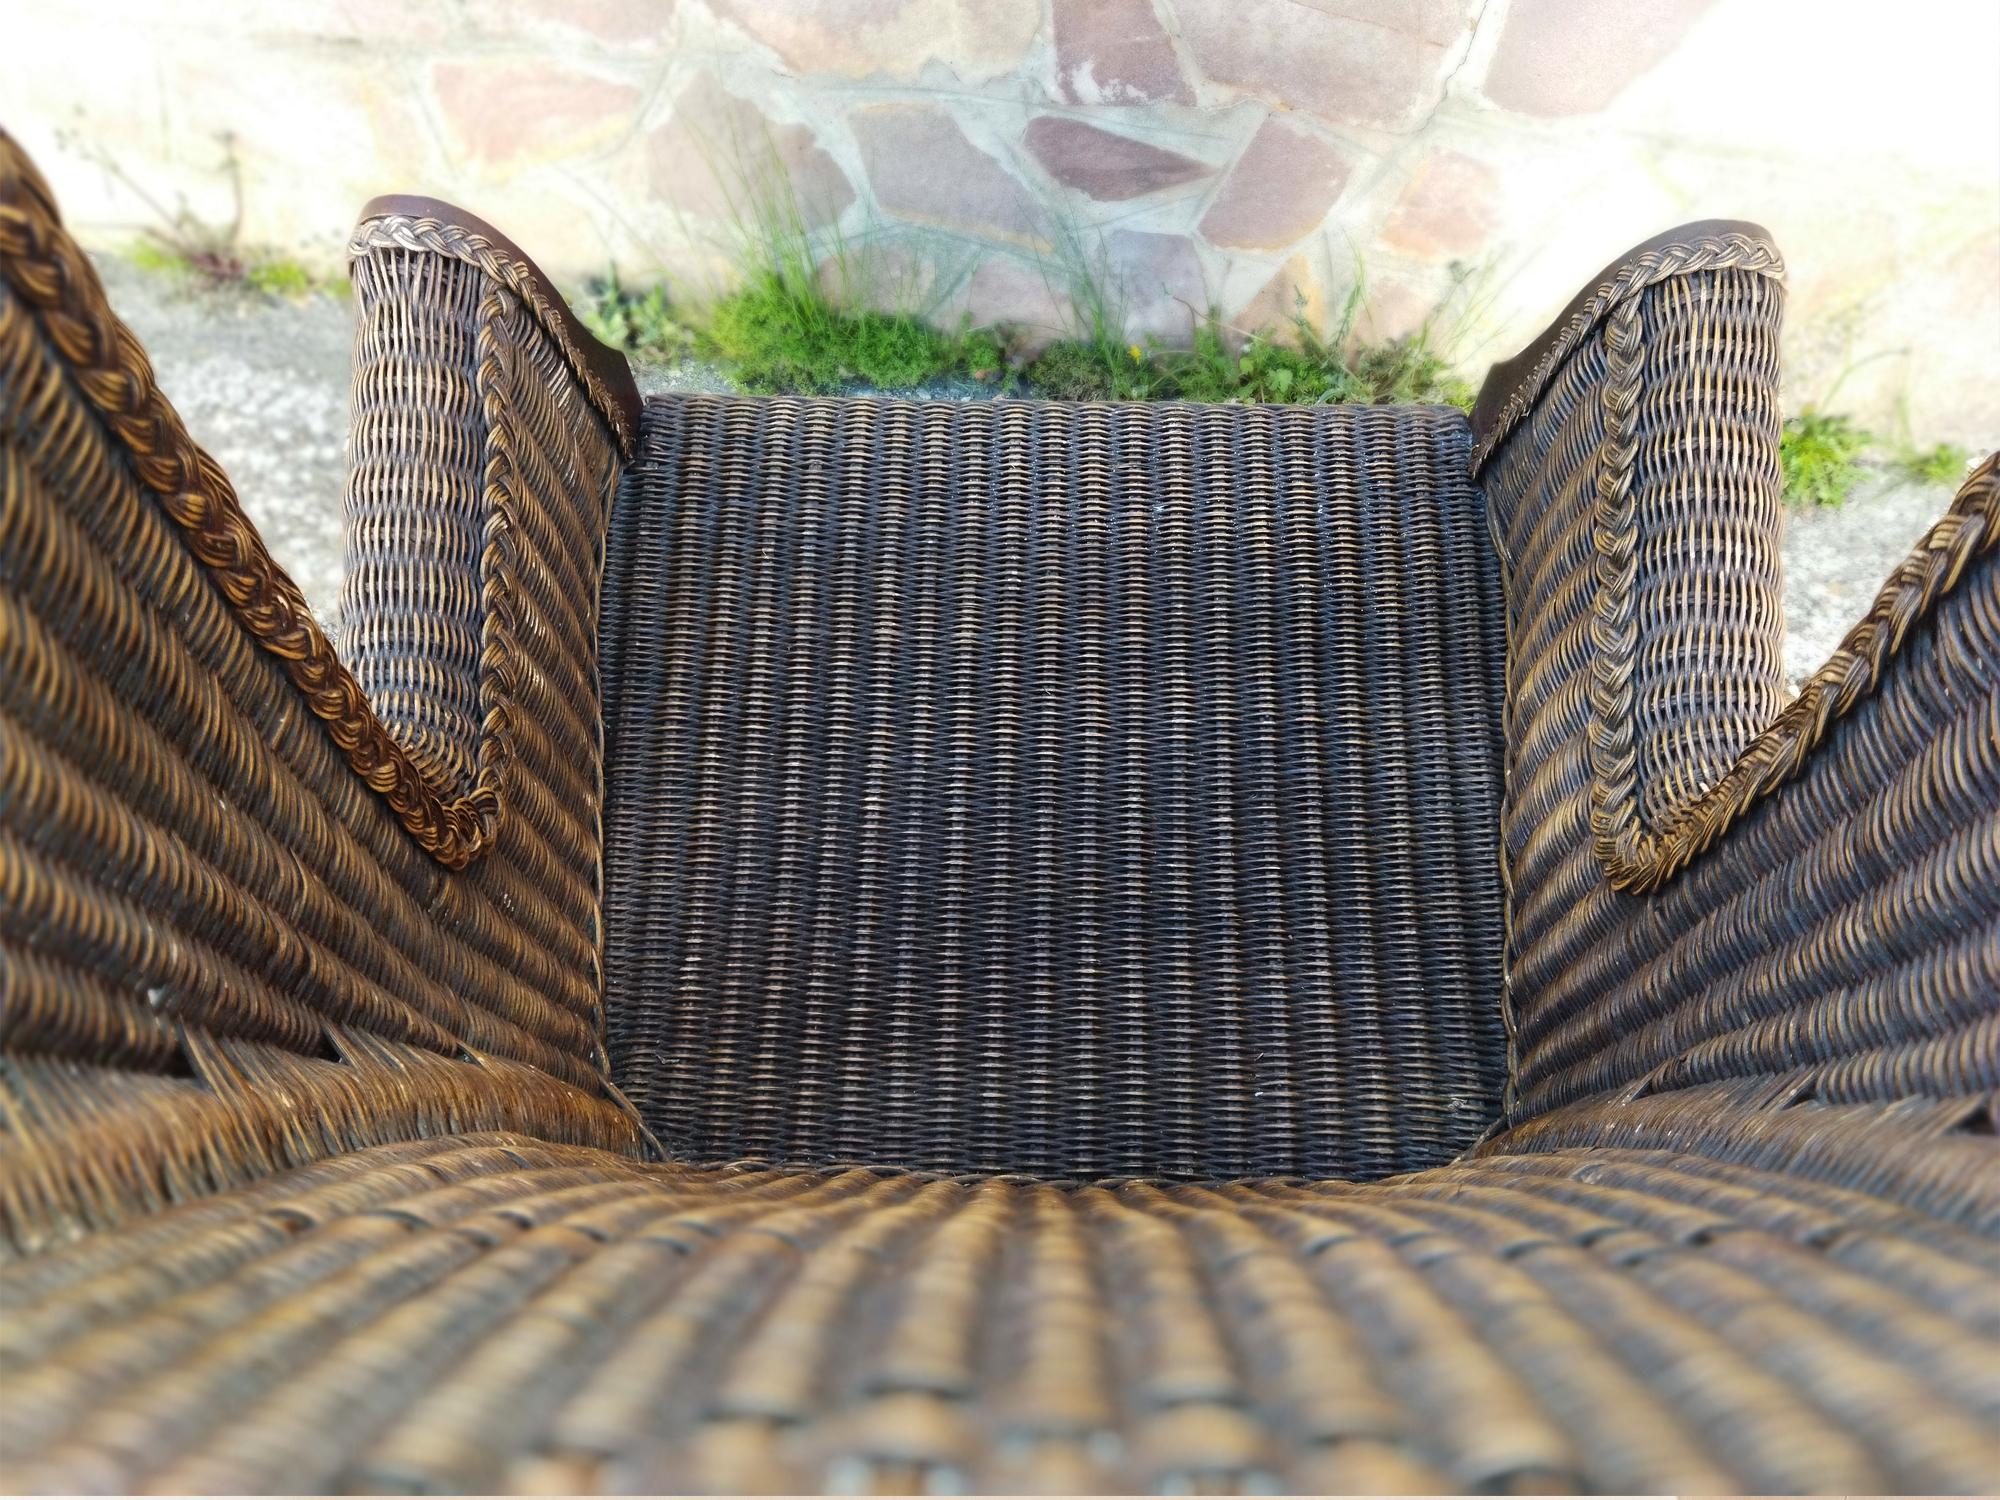  Spectacular VictorianStyle  Wicker Throne, Very Big  High Backrest  Wide Seat For Sale 3